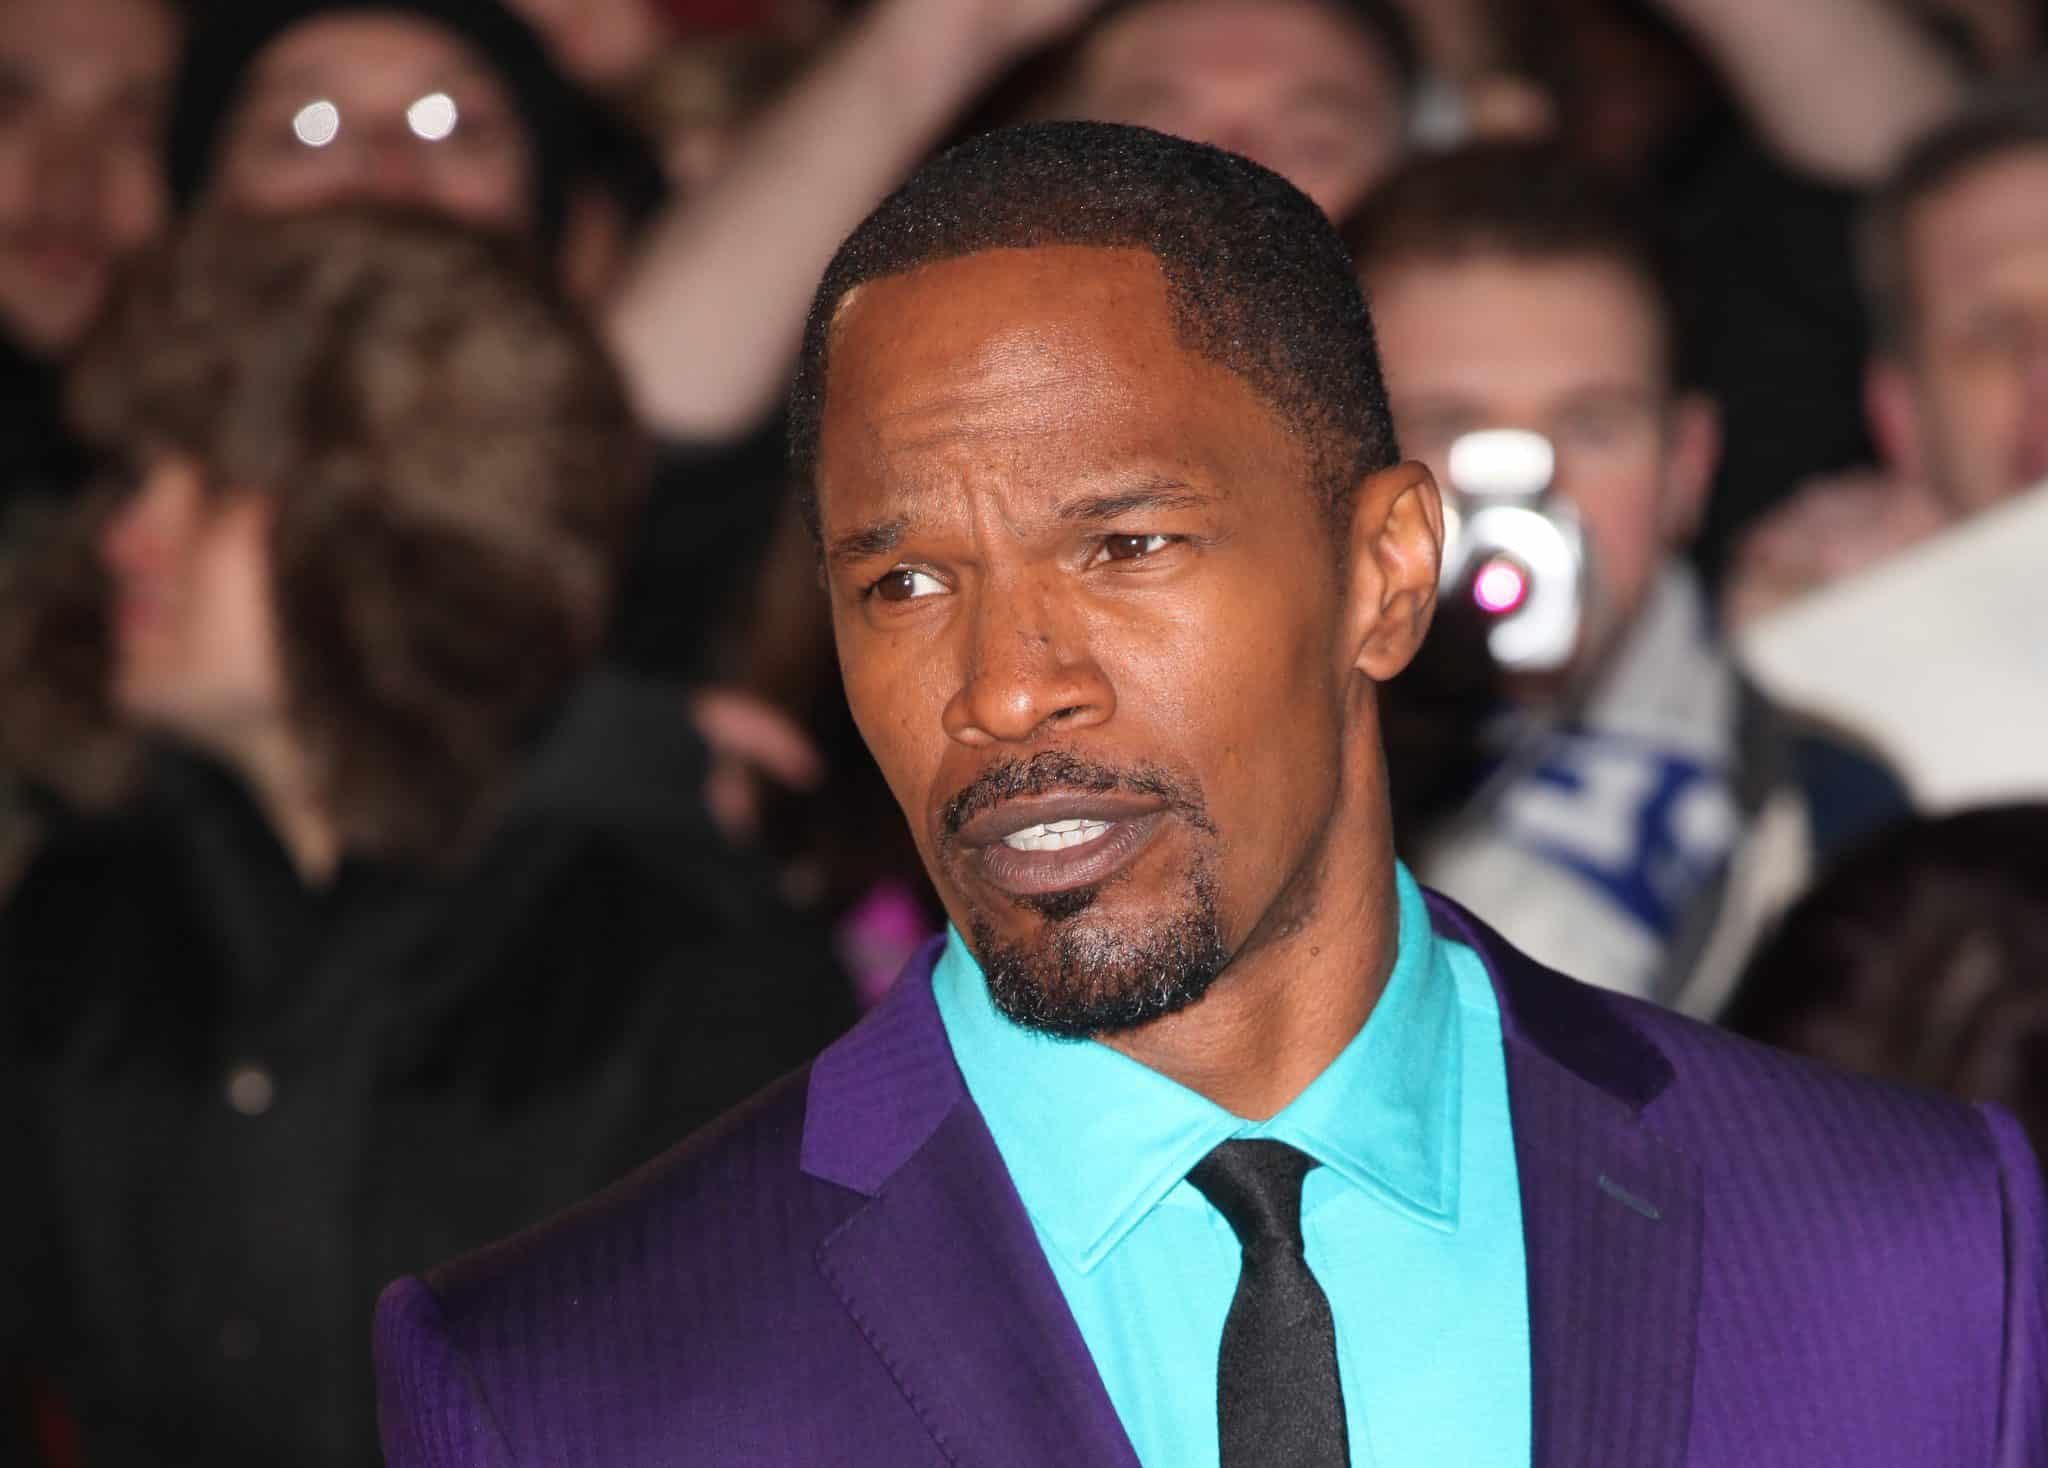 Kerry Washington, LeBron James and More Send Jamie Foxx Well Wishes Amid 'Medical Complication'